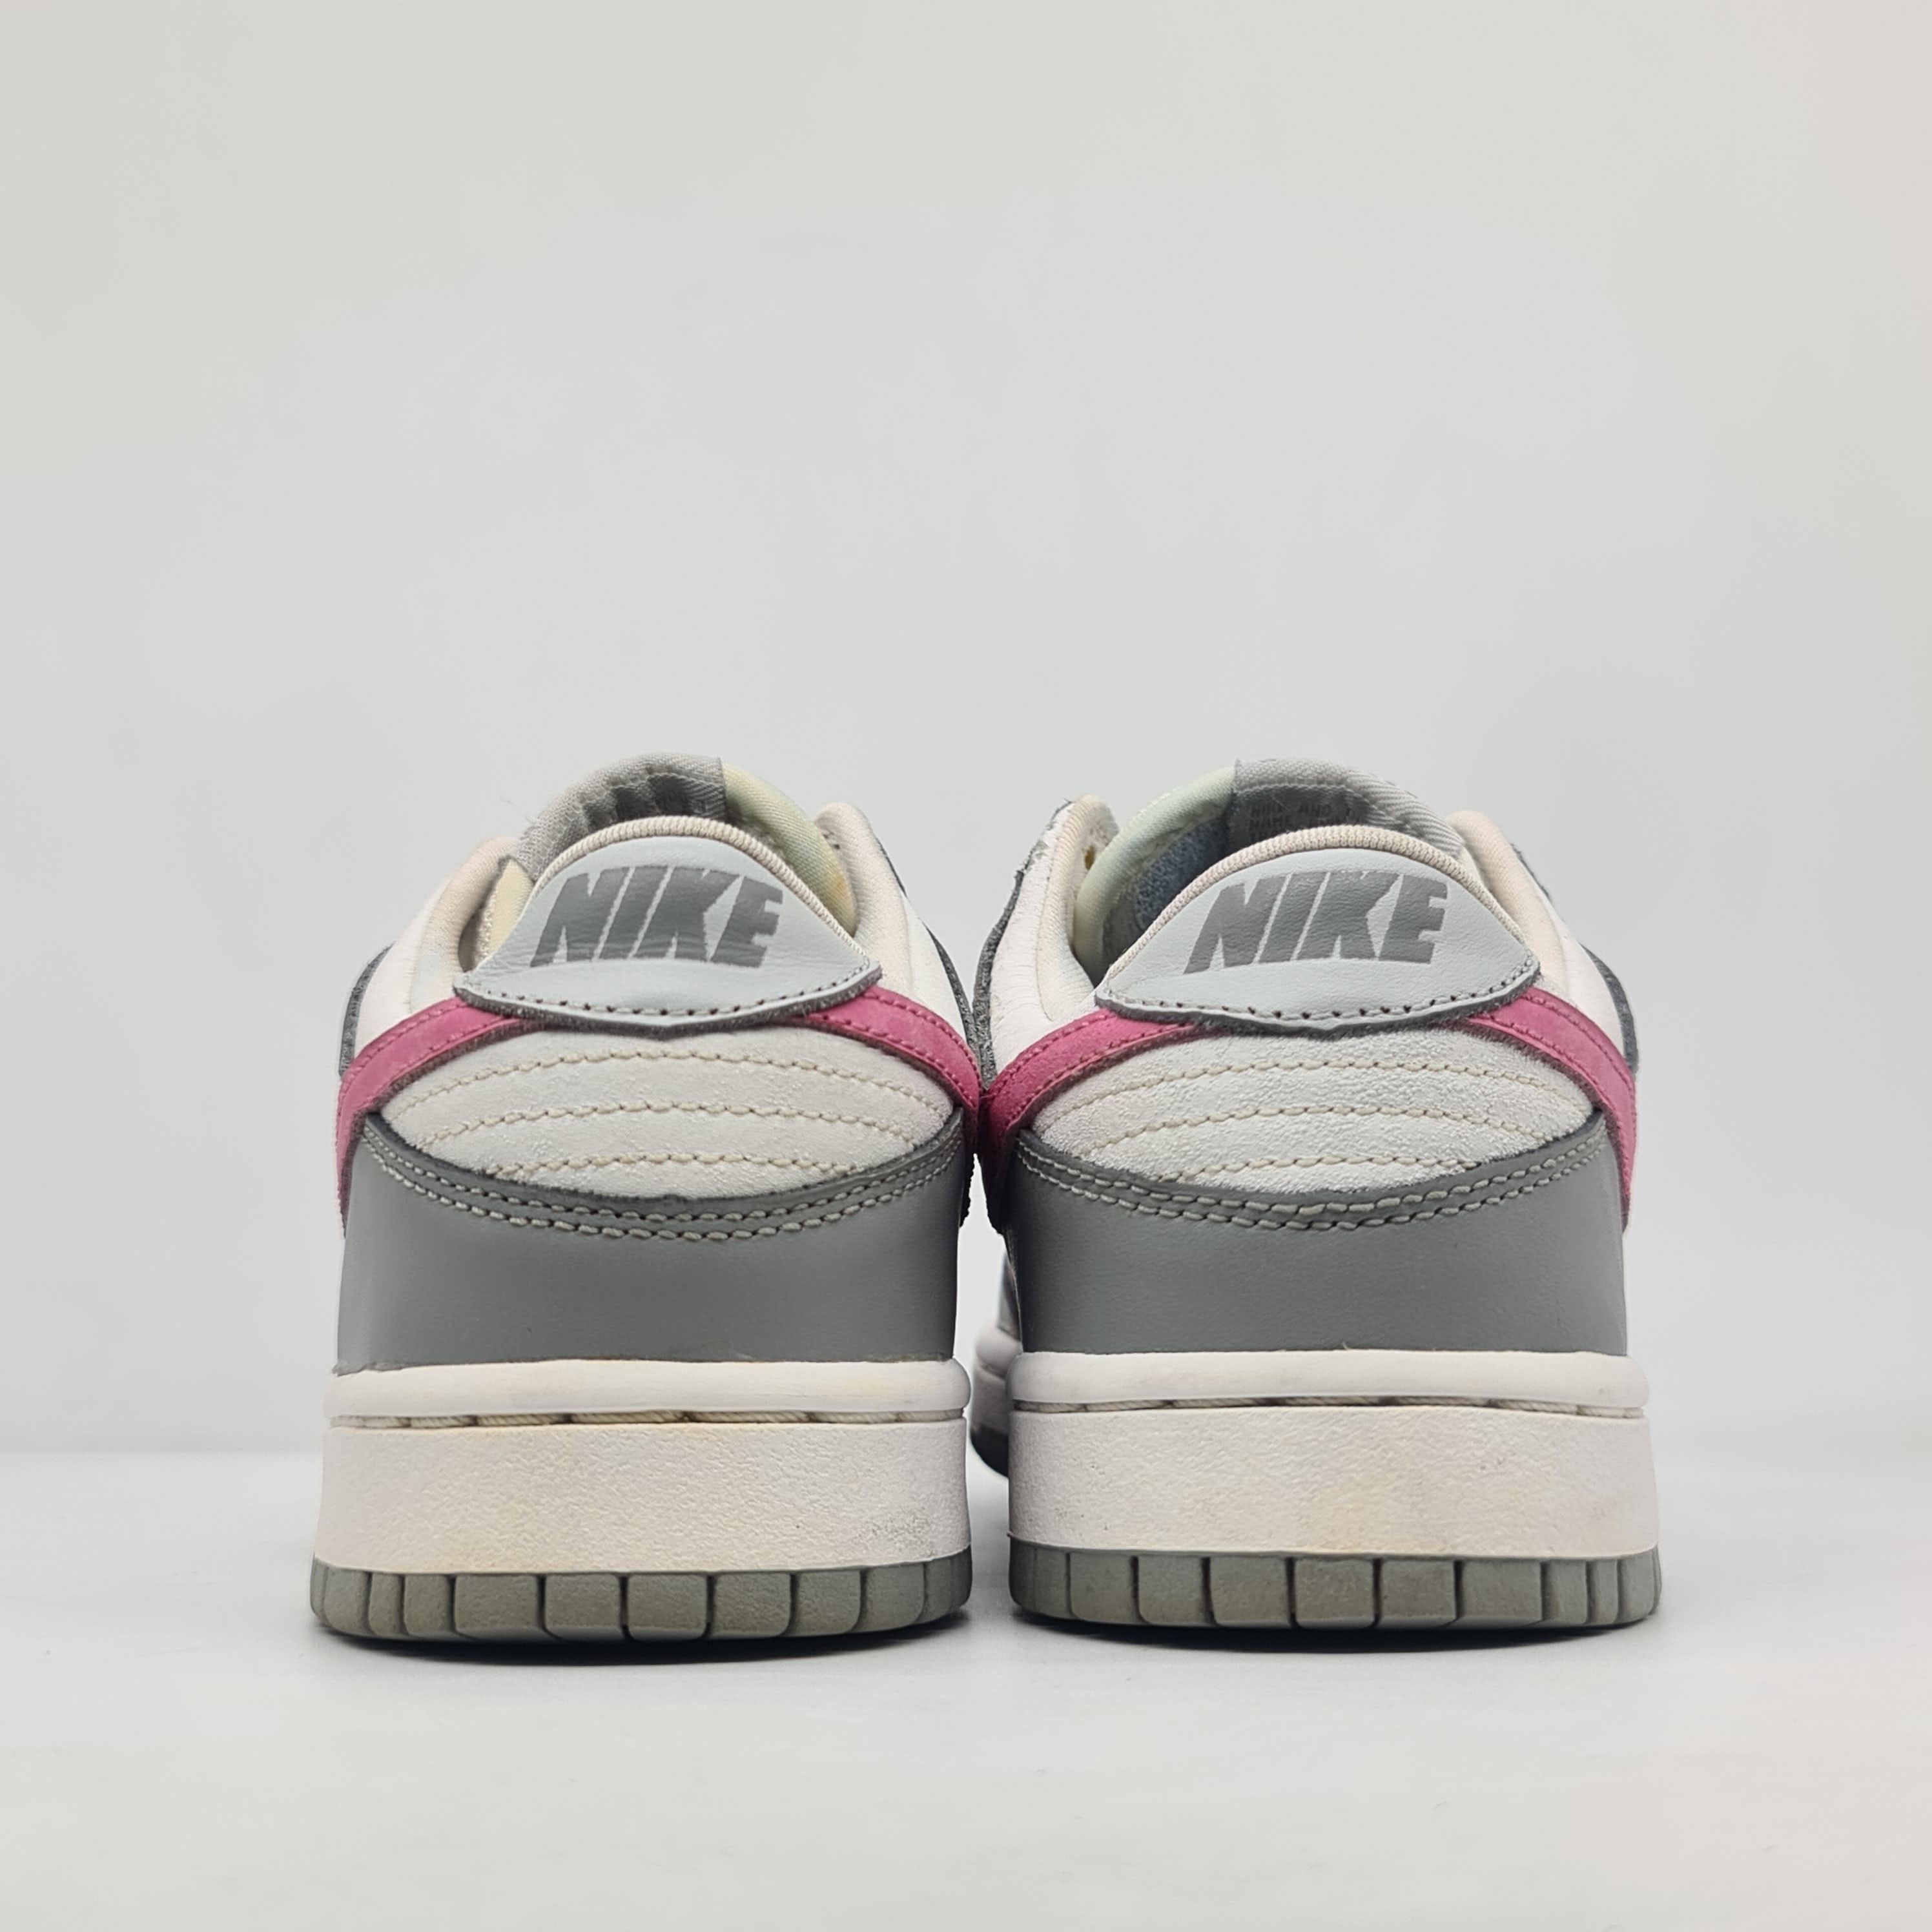 Nike - 2004 W's Dunk Low Pro Pink Neutral Gray - 7